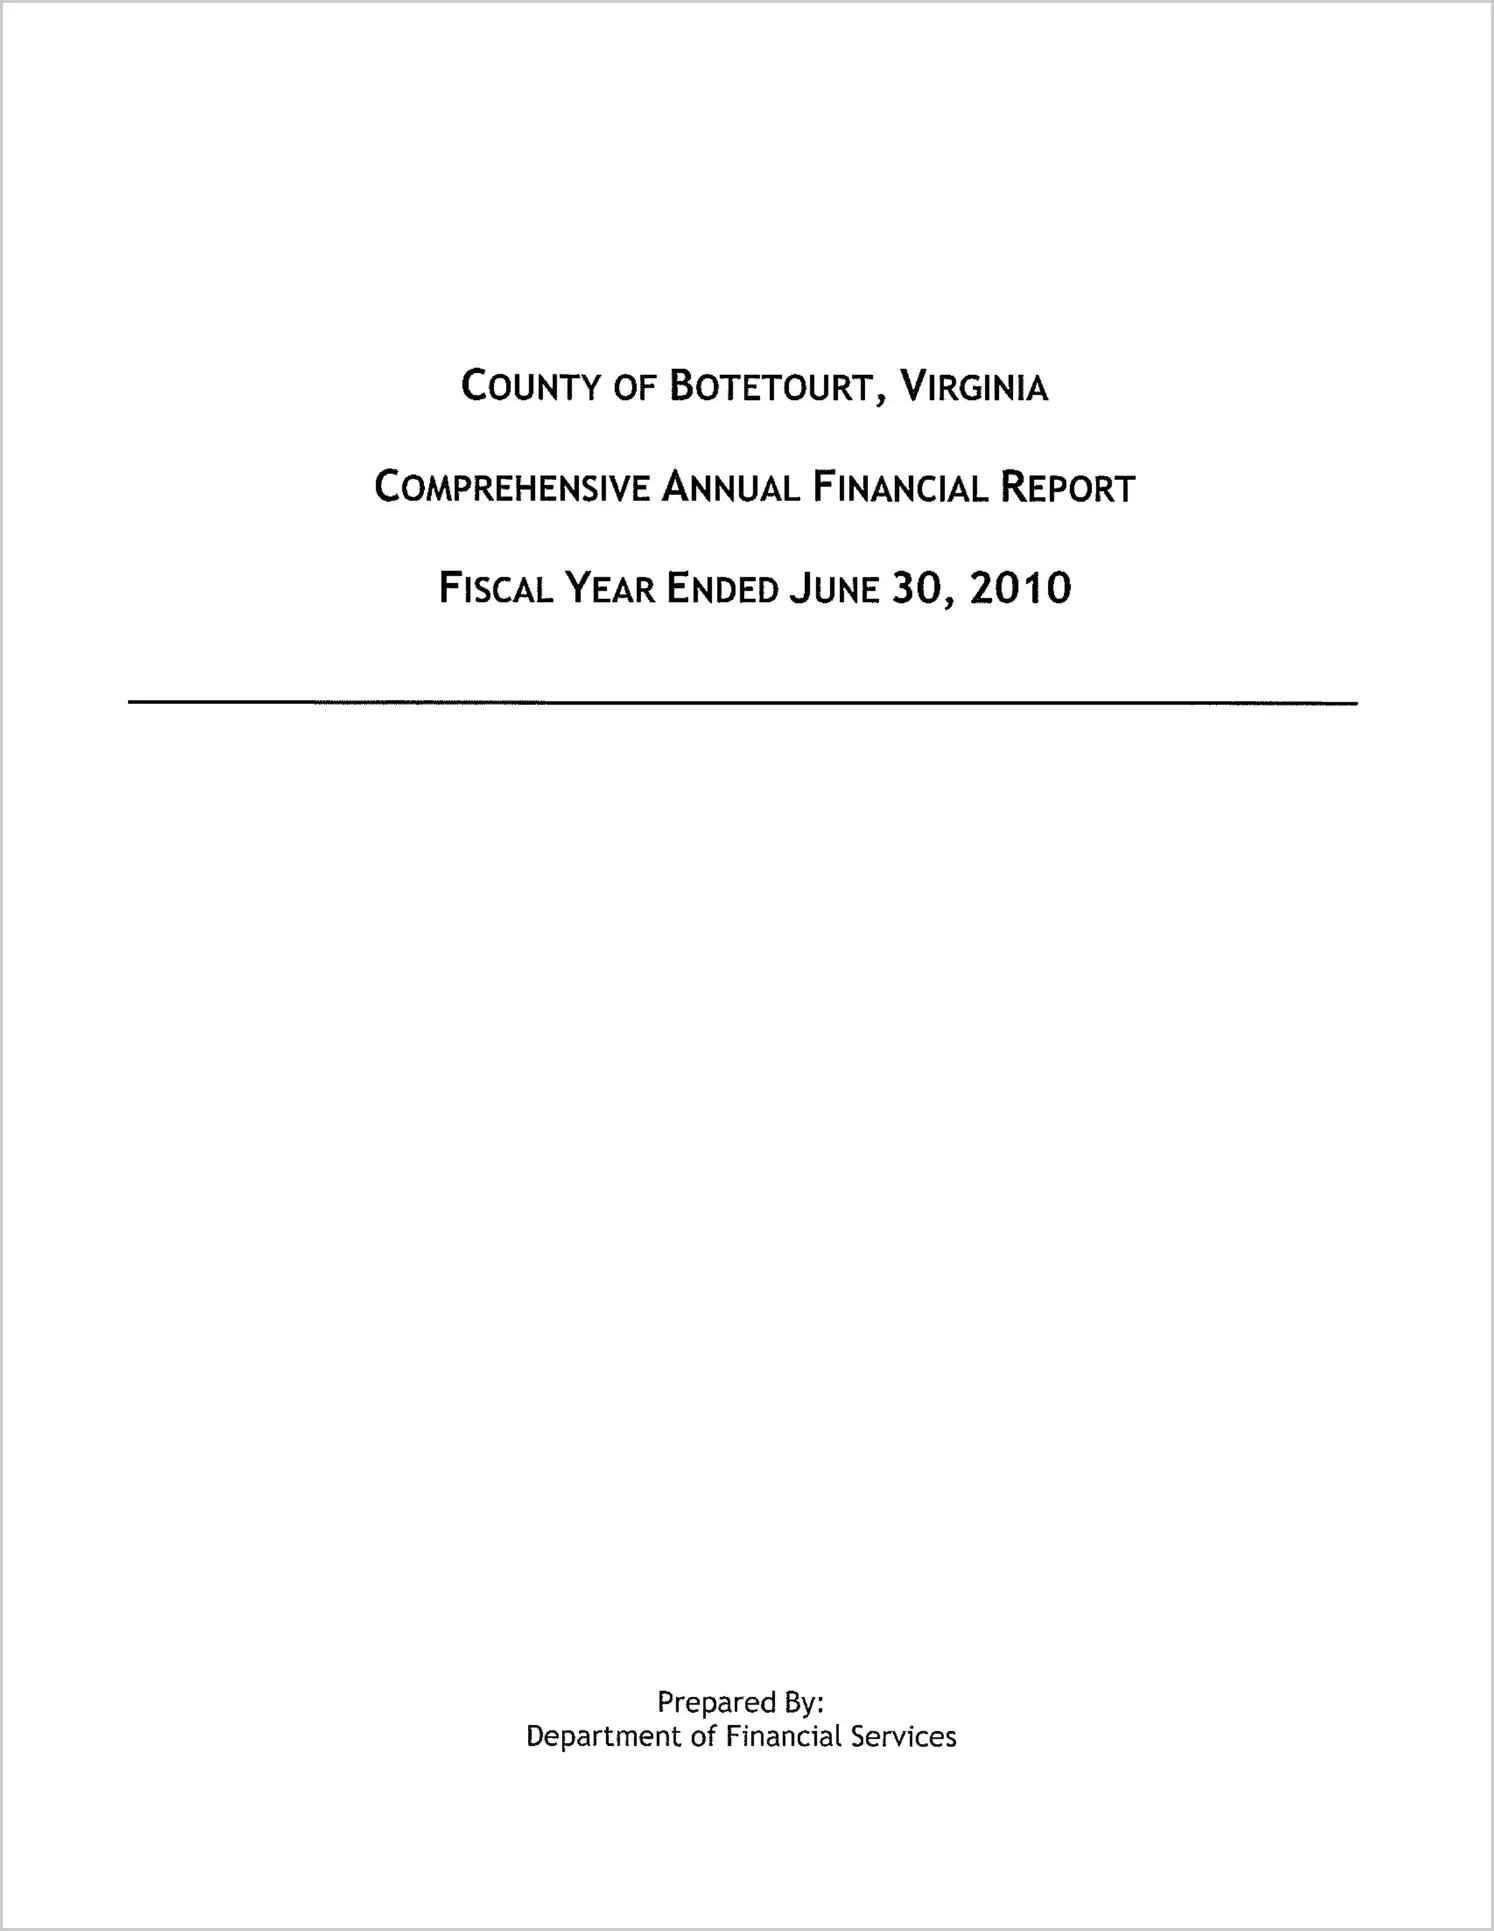 2010 Annual Financial Report for County of Botetourt